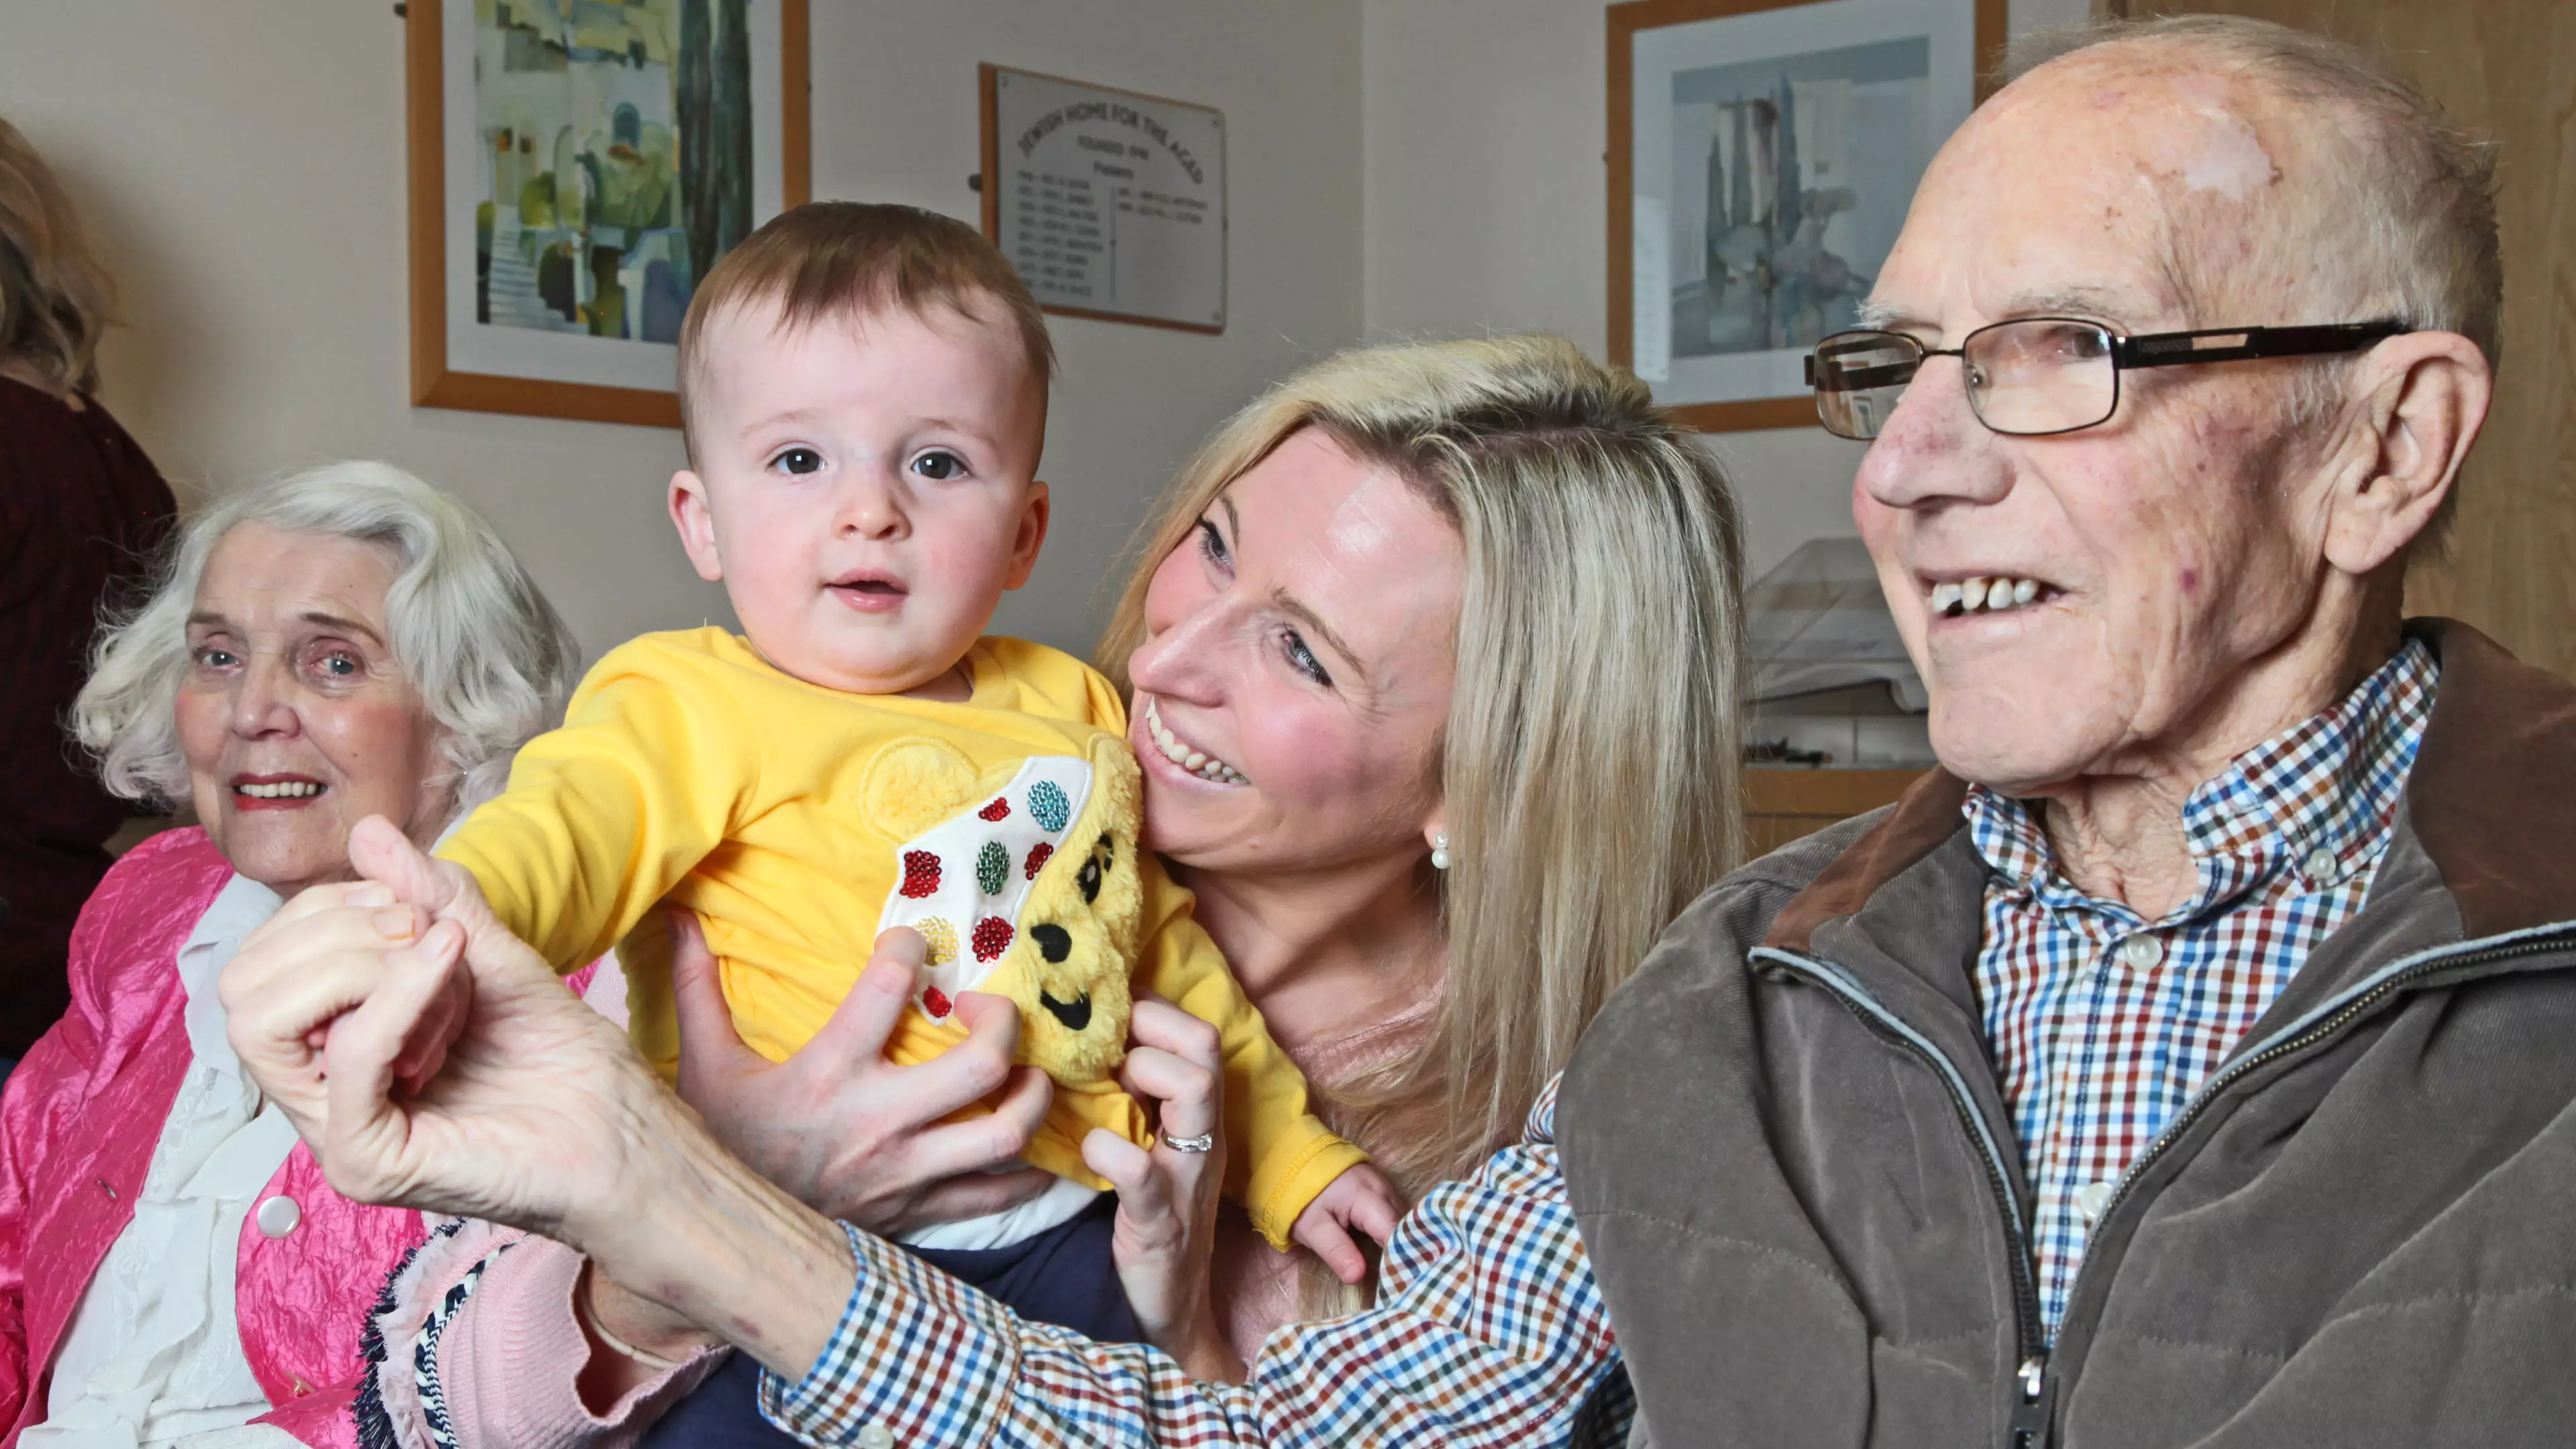 A Music Class For Babies Is Held In A Care Home To Help Dementia Patients